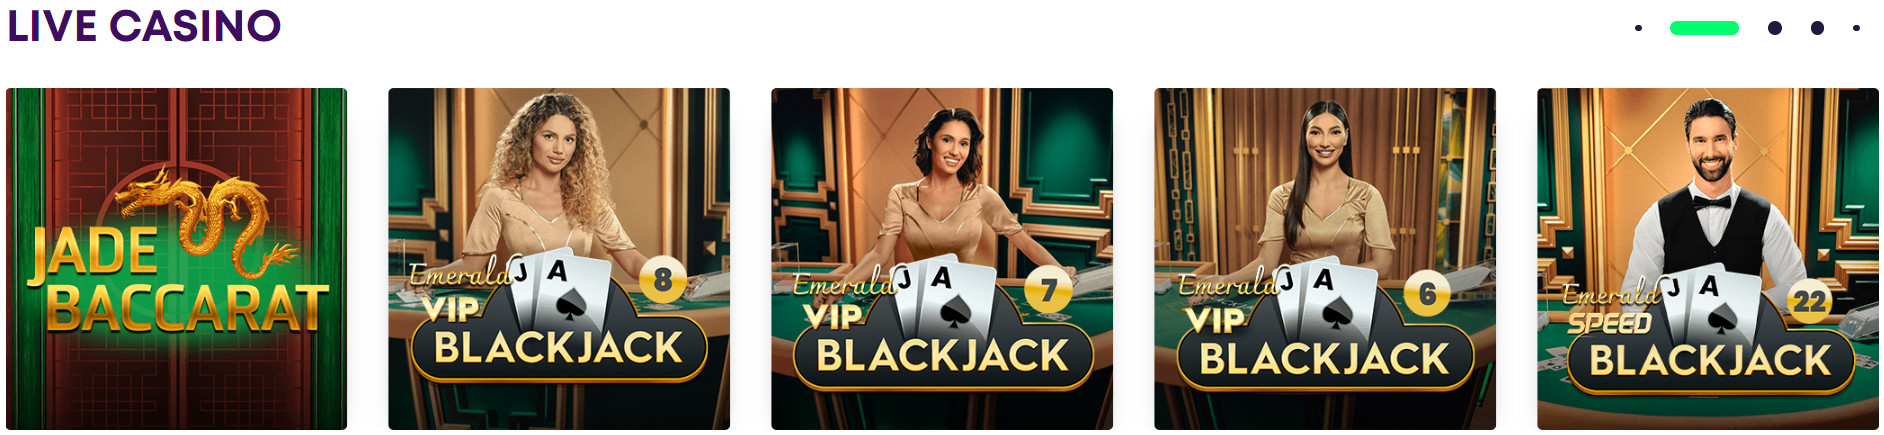 Live Casino Section at Casino Rocket